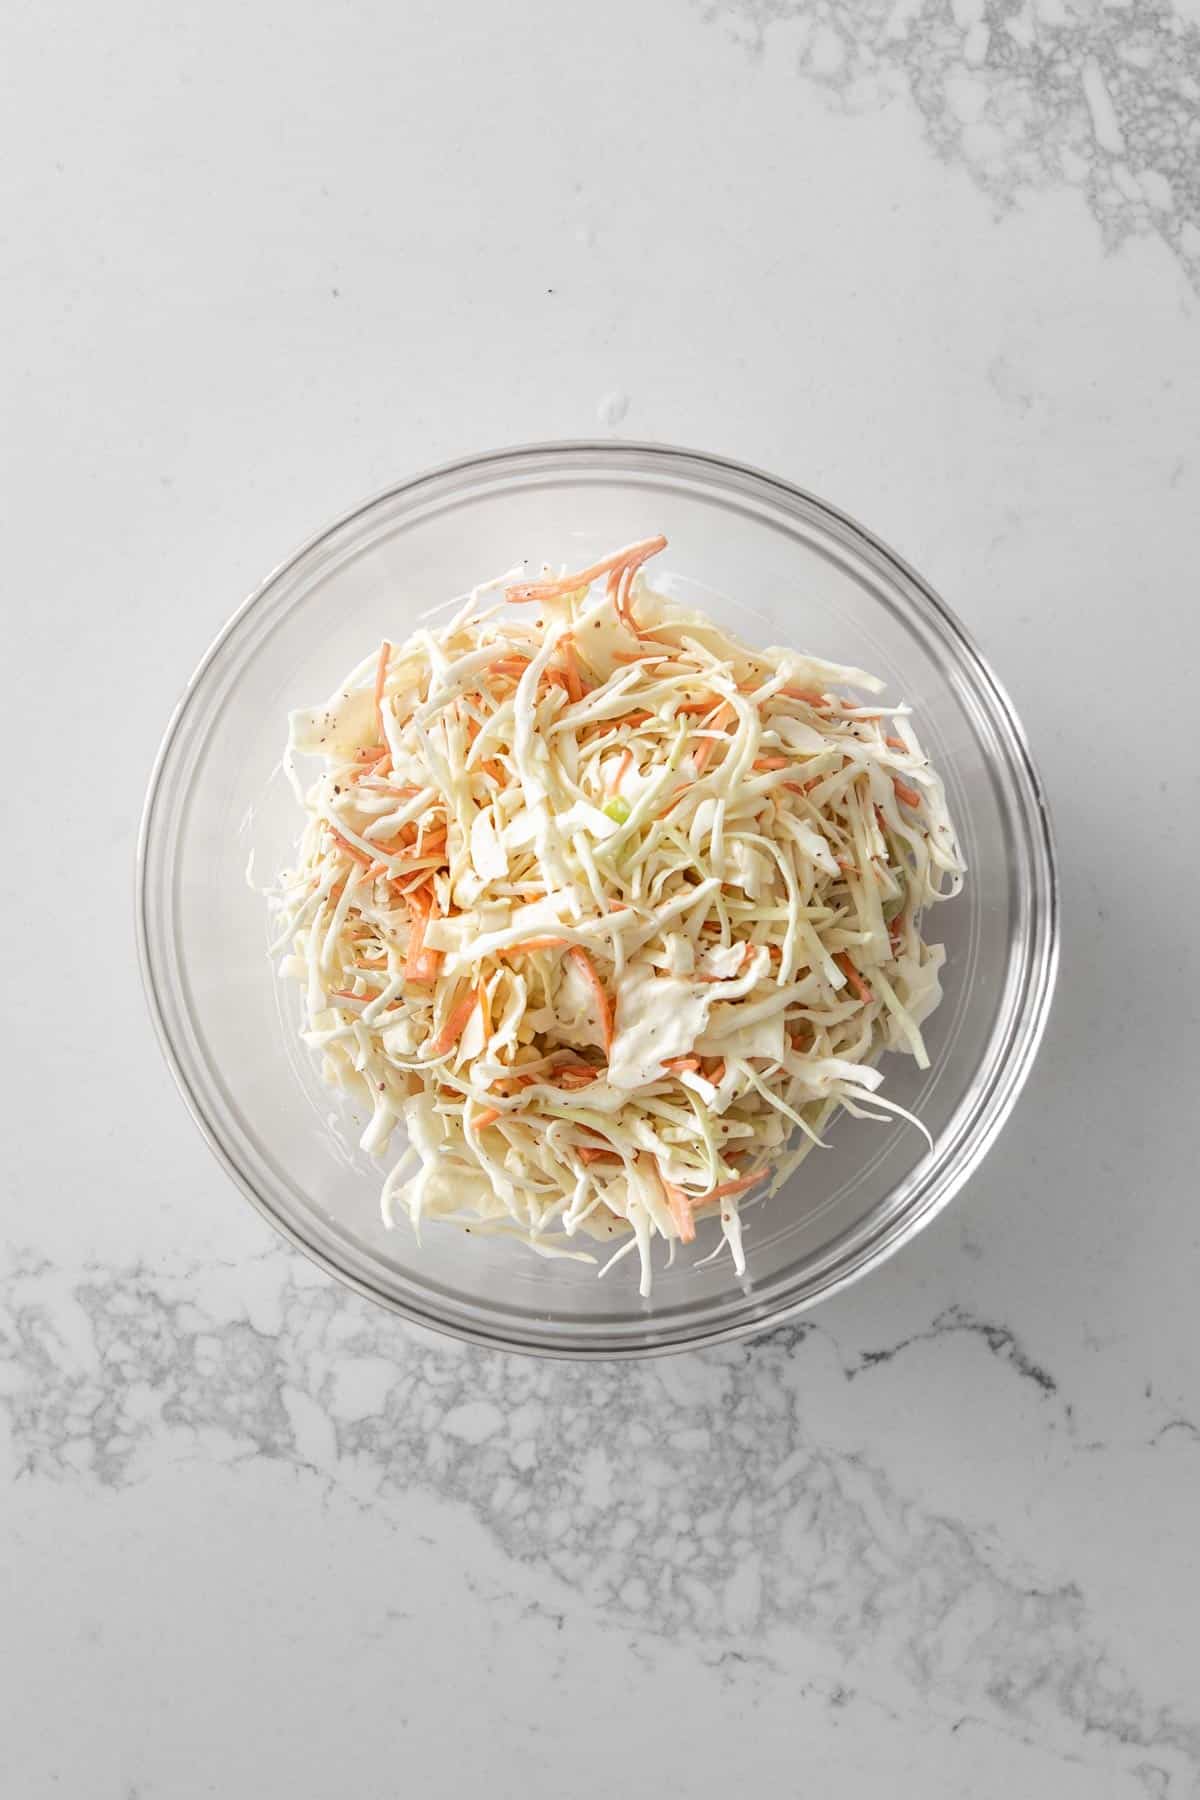 Creamy coleslaw in a glass bowl on marble countertop.